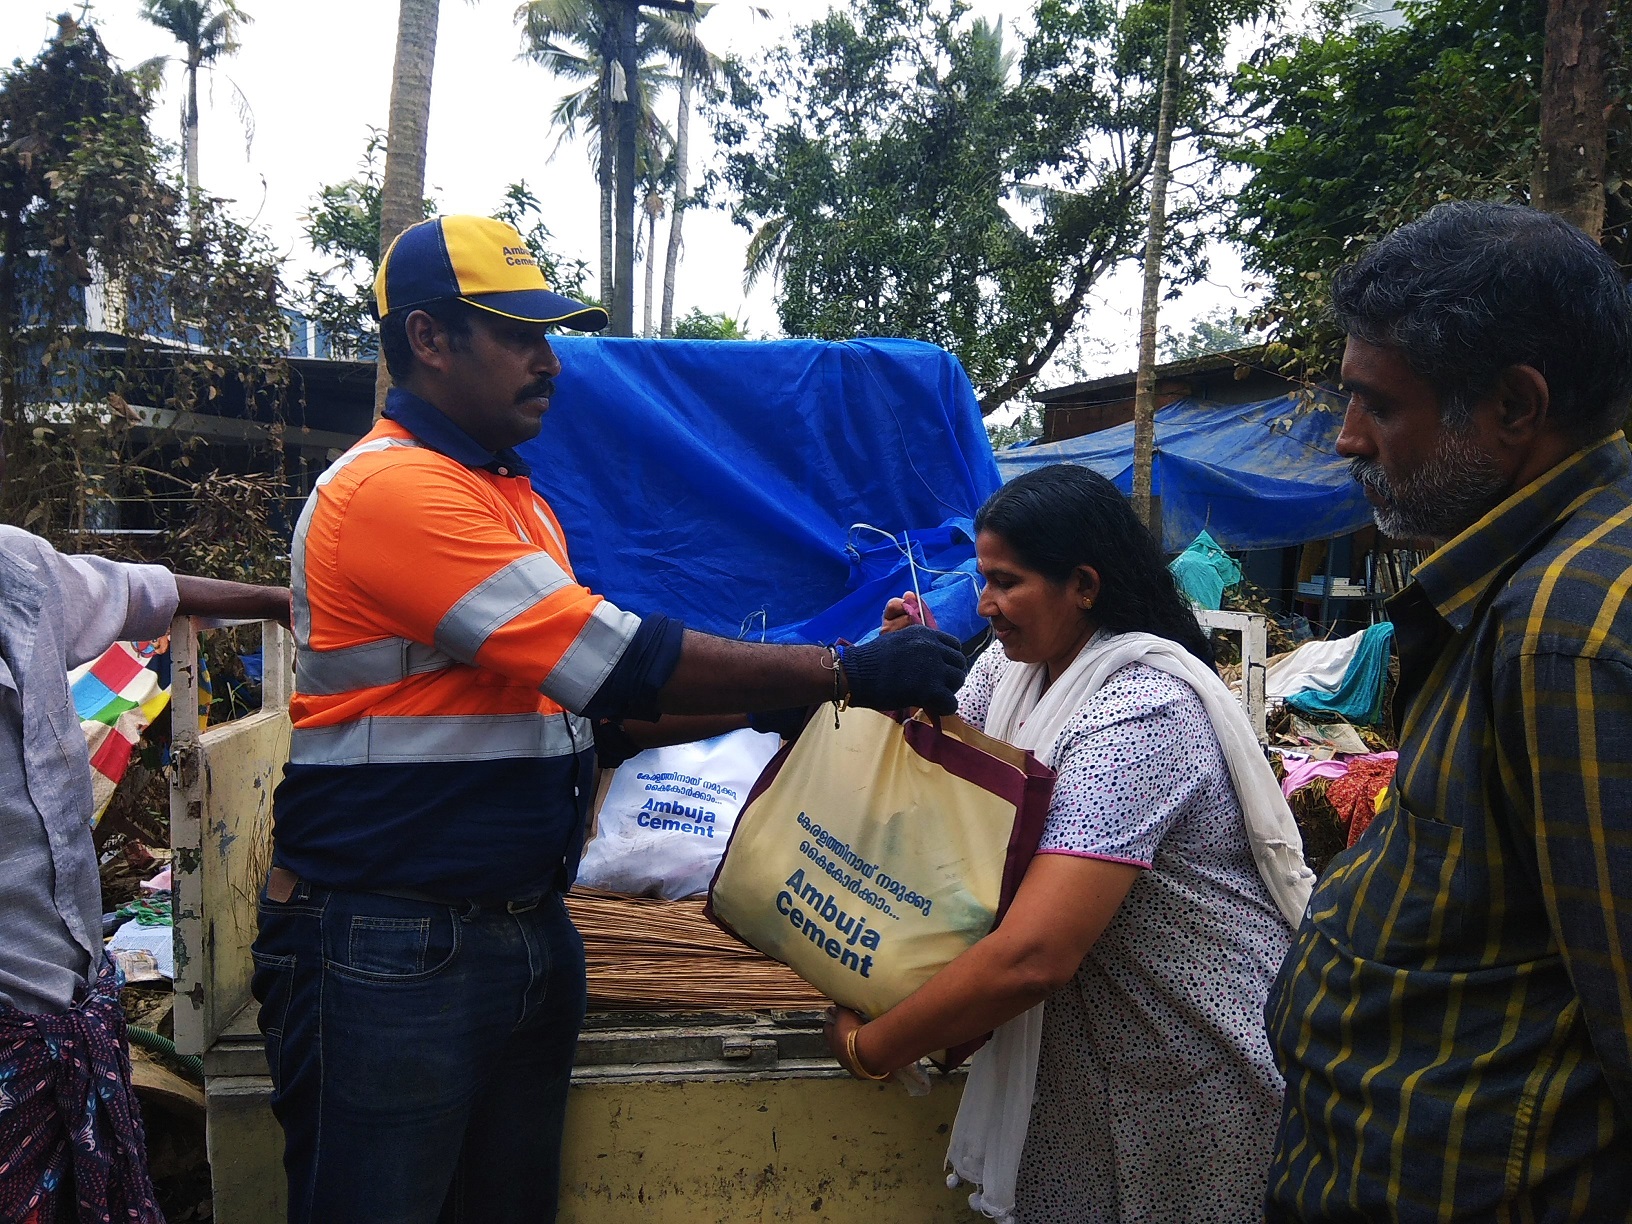 Ambuja Cement takes lead to stabilise lives of flood-affected people in Kerala